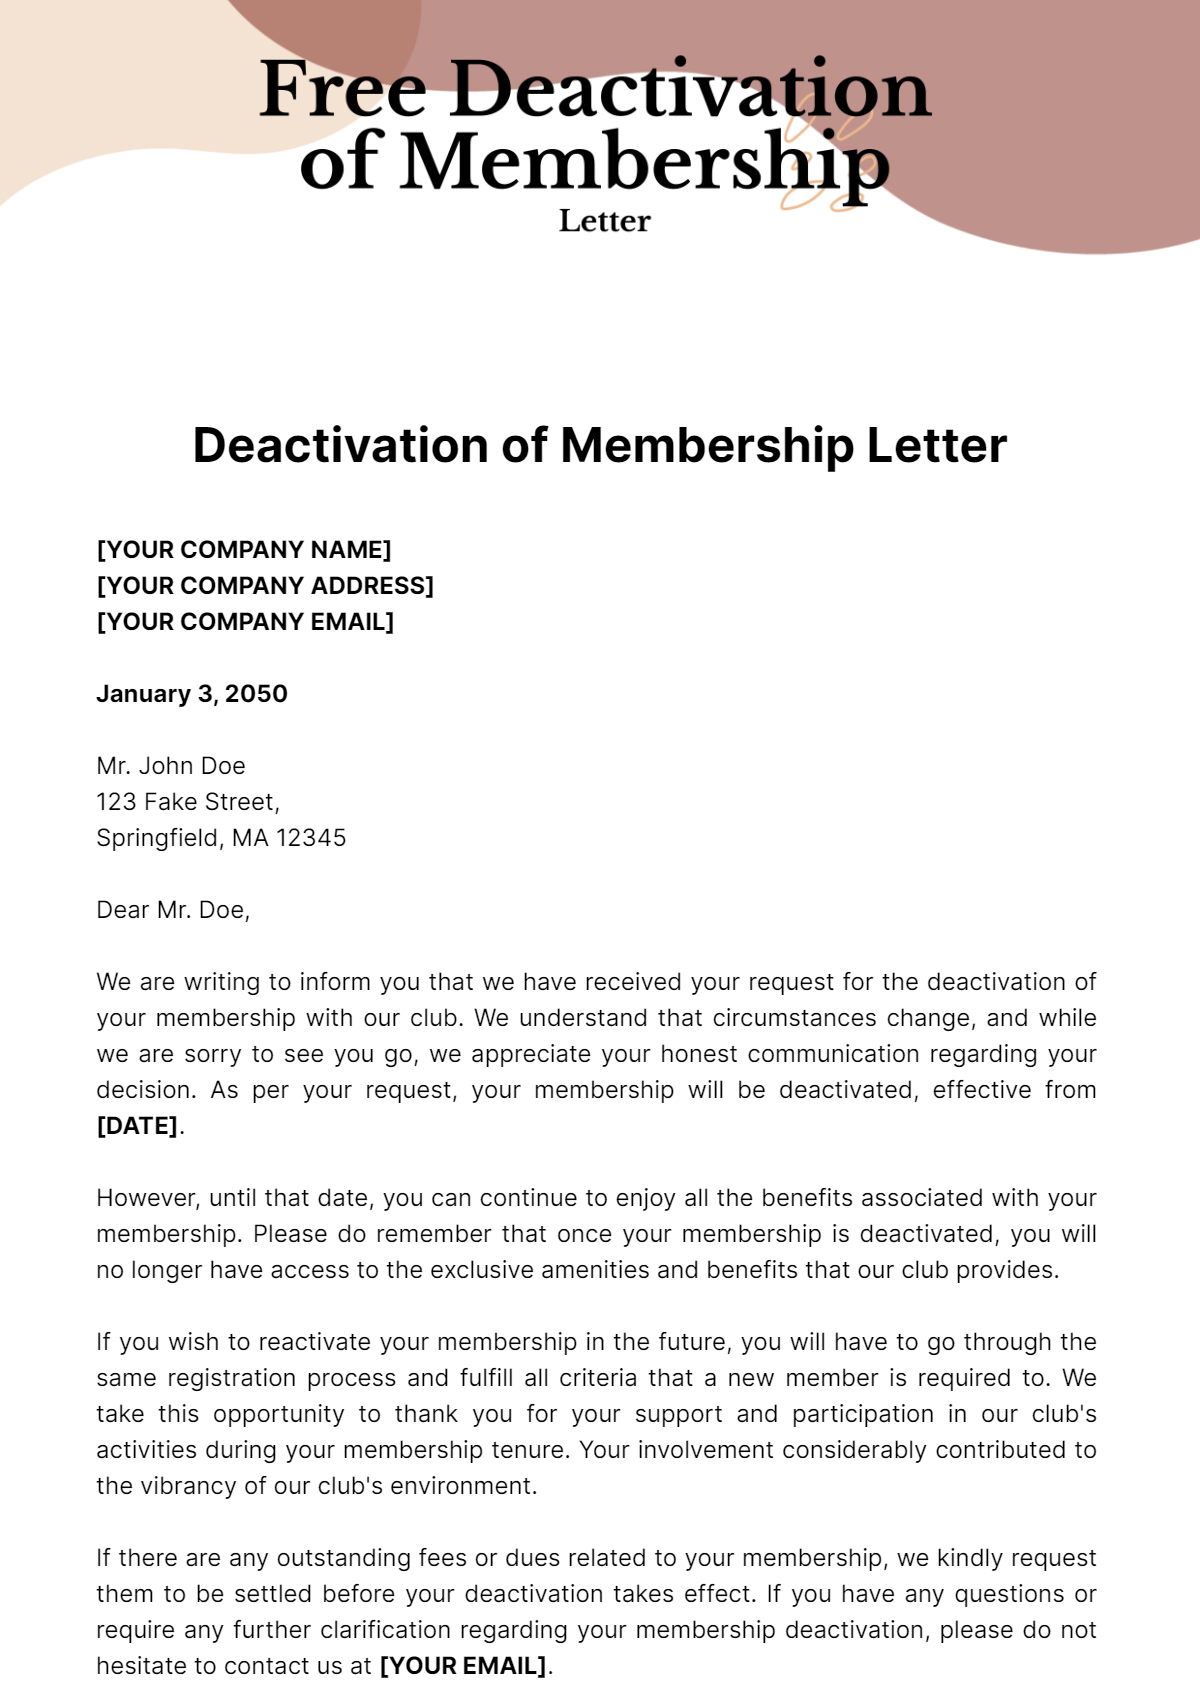 Free Deactivation of Membership Letter Template